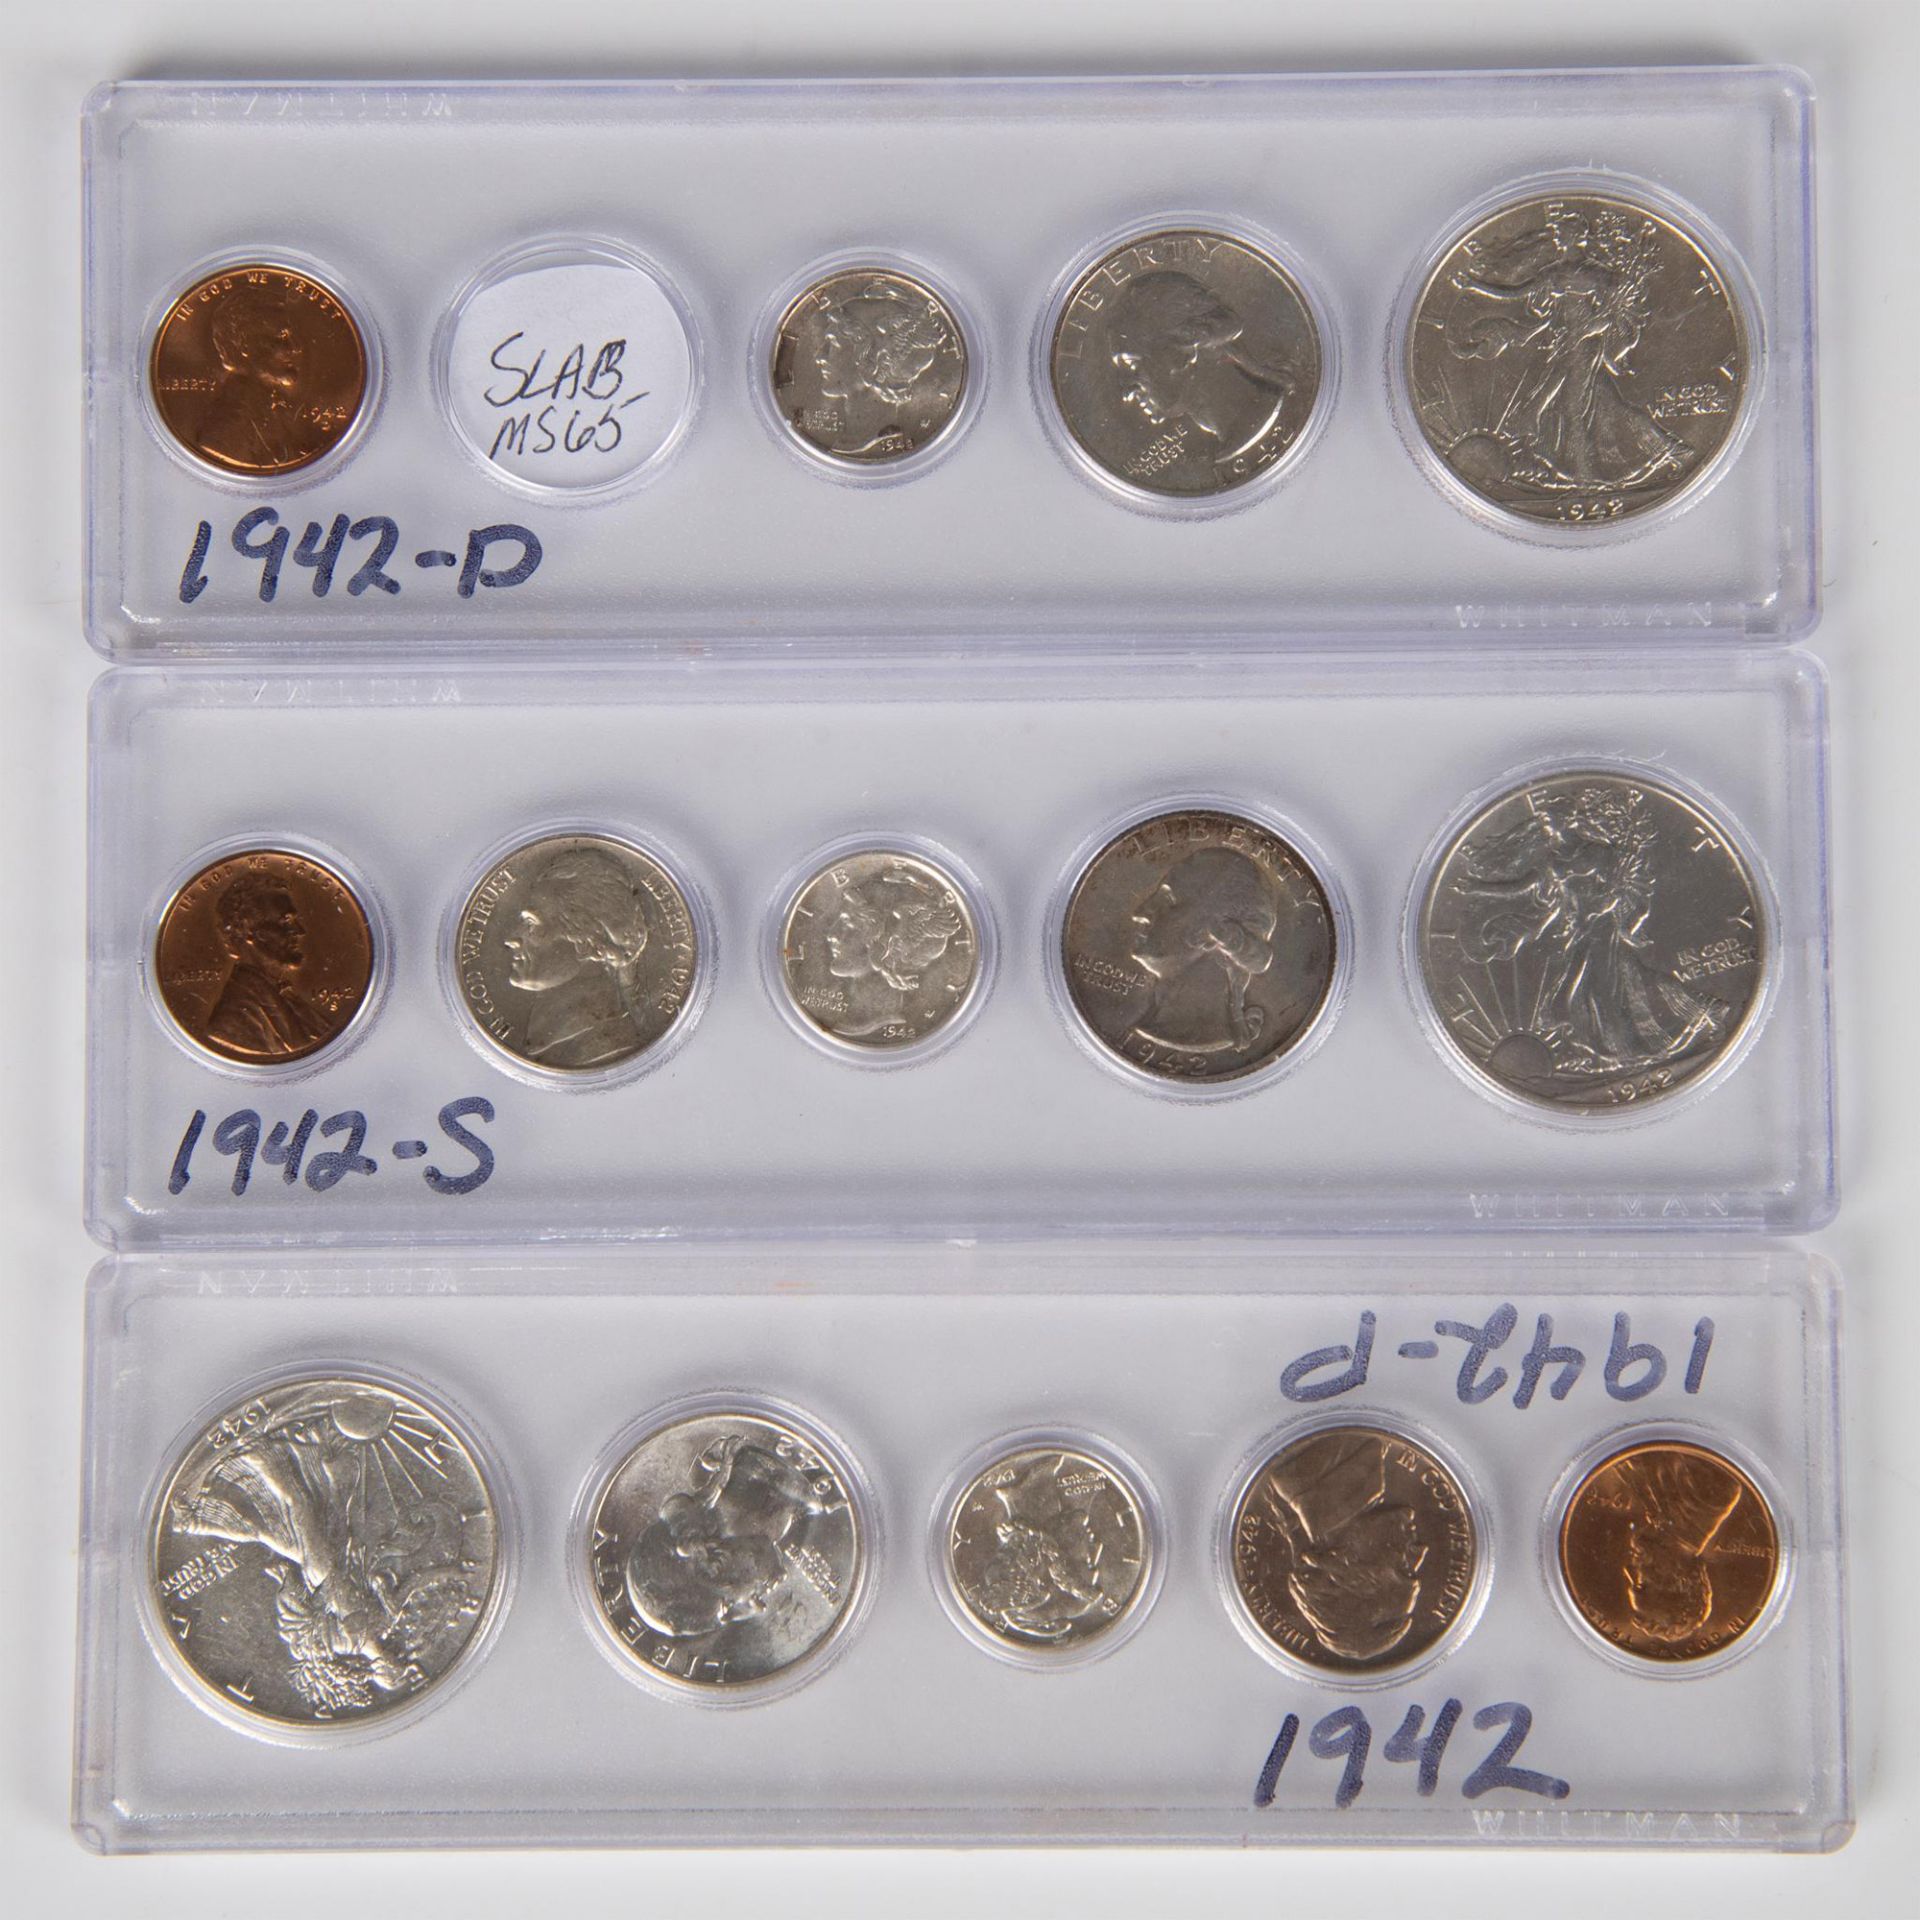 152PC COLLECTION OF US COINS FROM YEARS 1940-1949 - Image 8 of 20